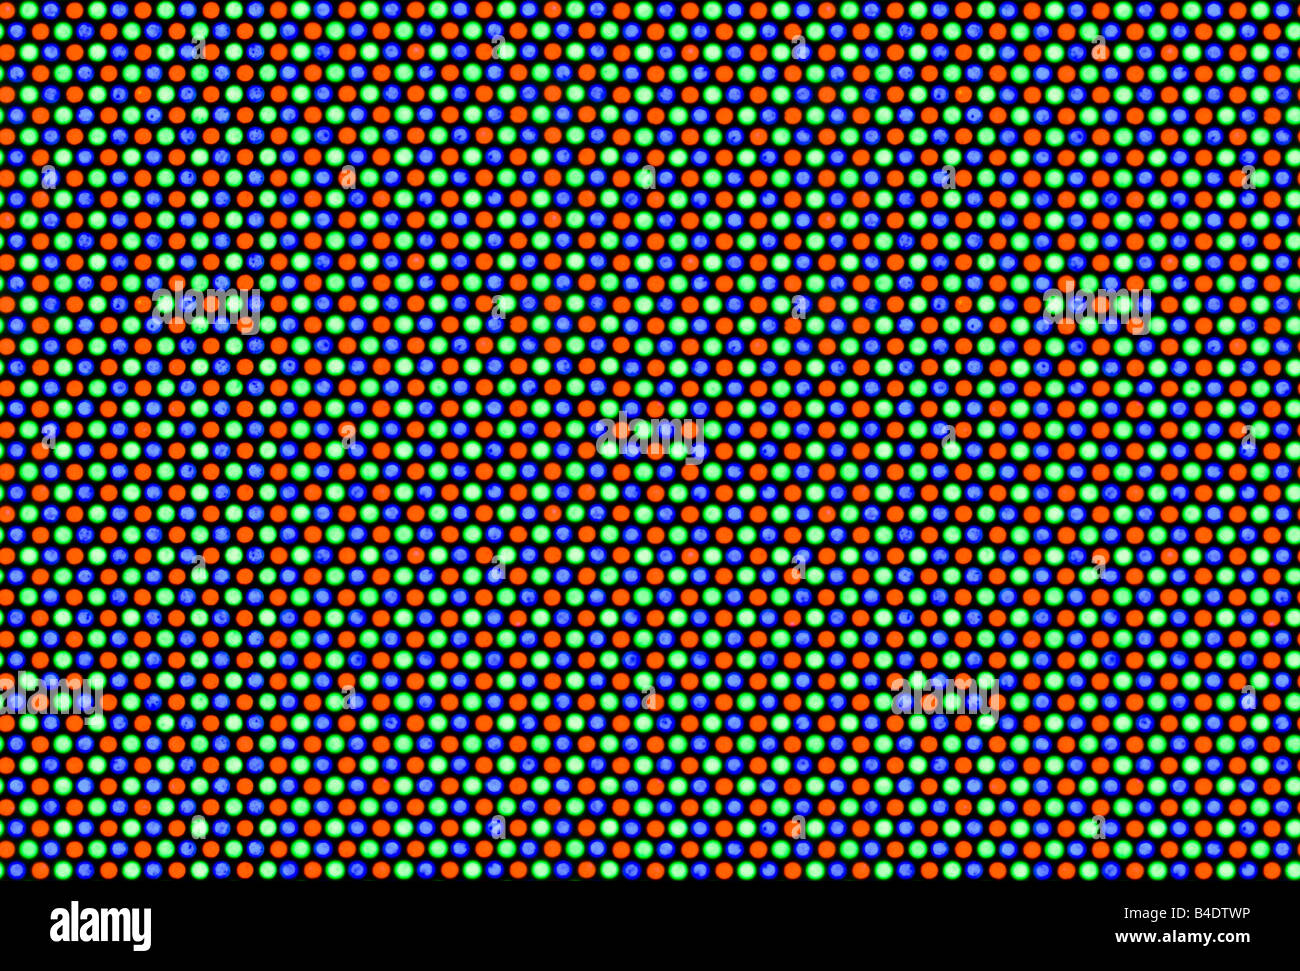 Pixels of cathode ray tube. Seamless picture Stock Photo